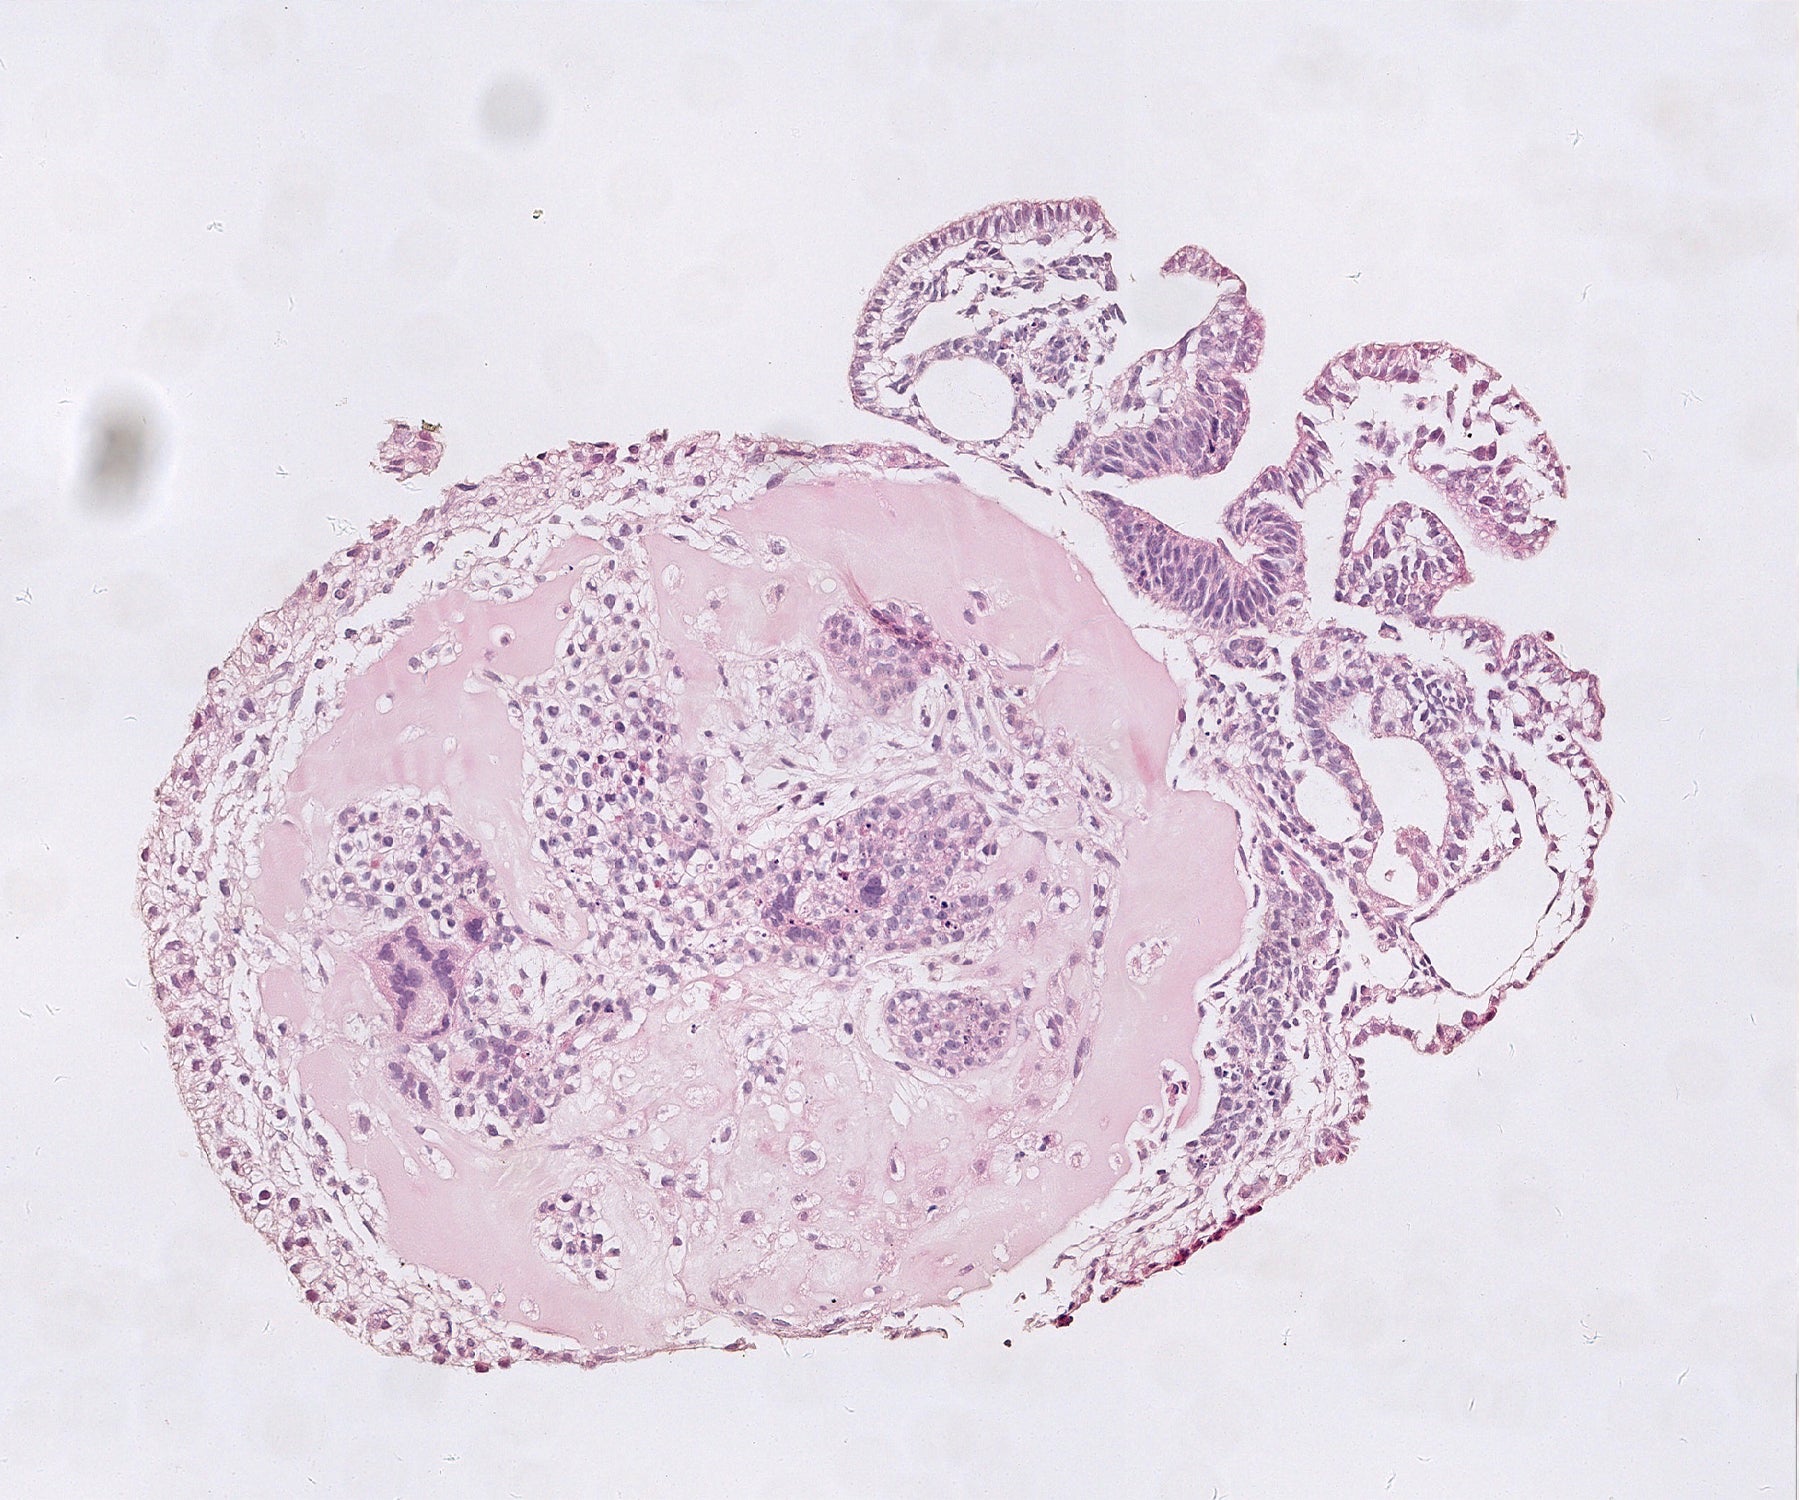 A 25-day-old monkey embryo stained with conventional dye (pink).